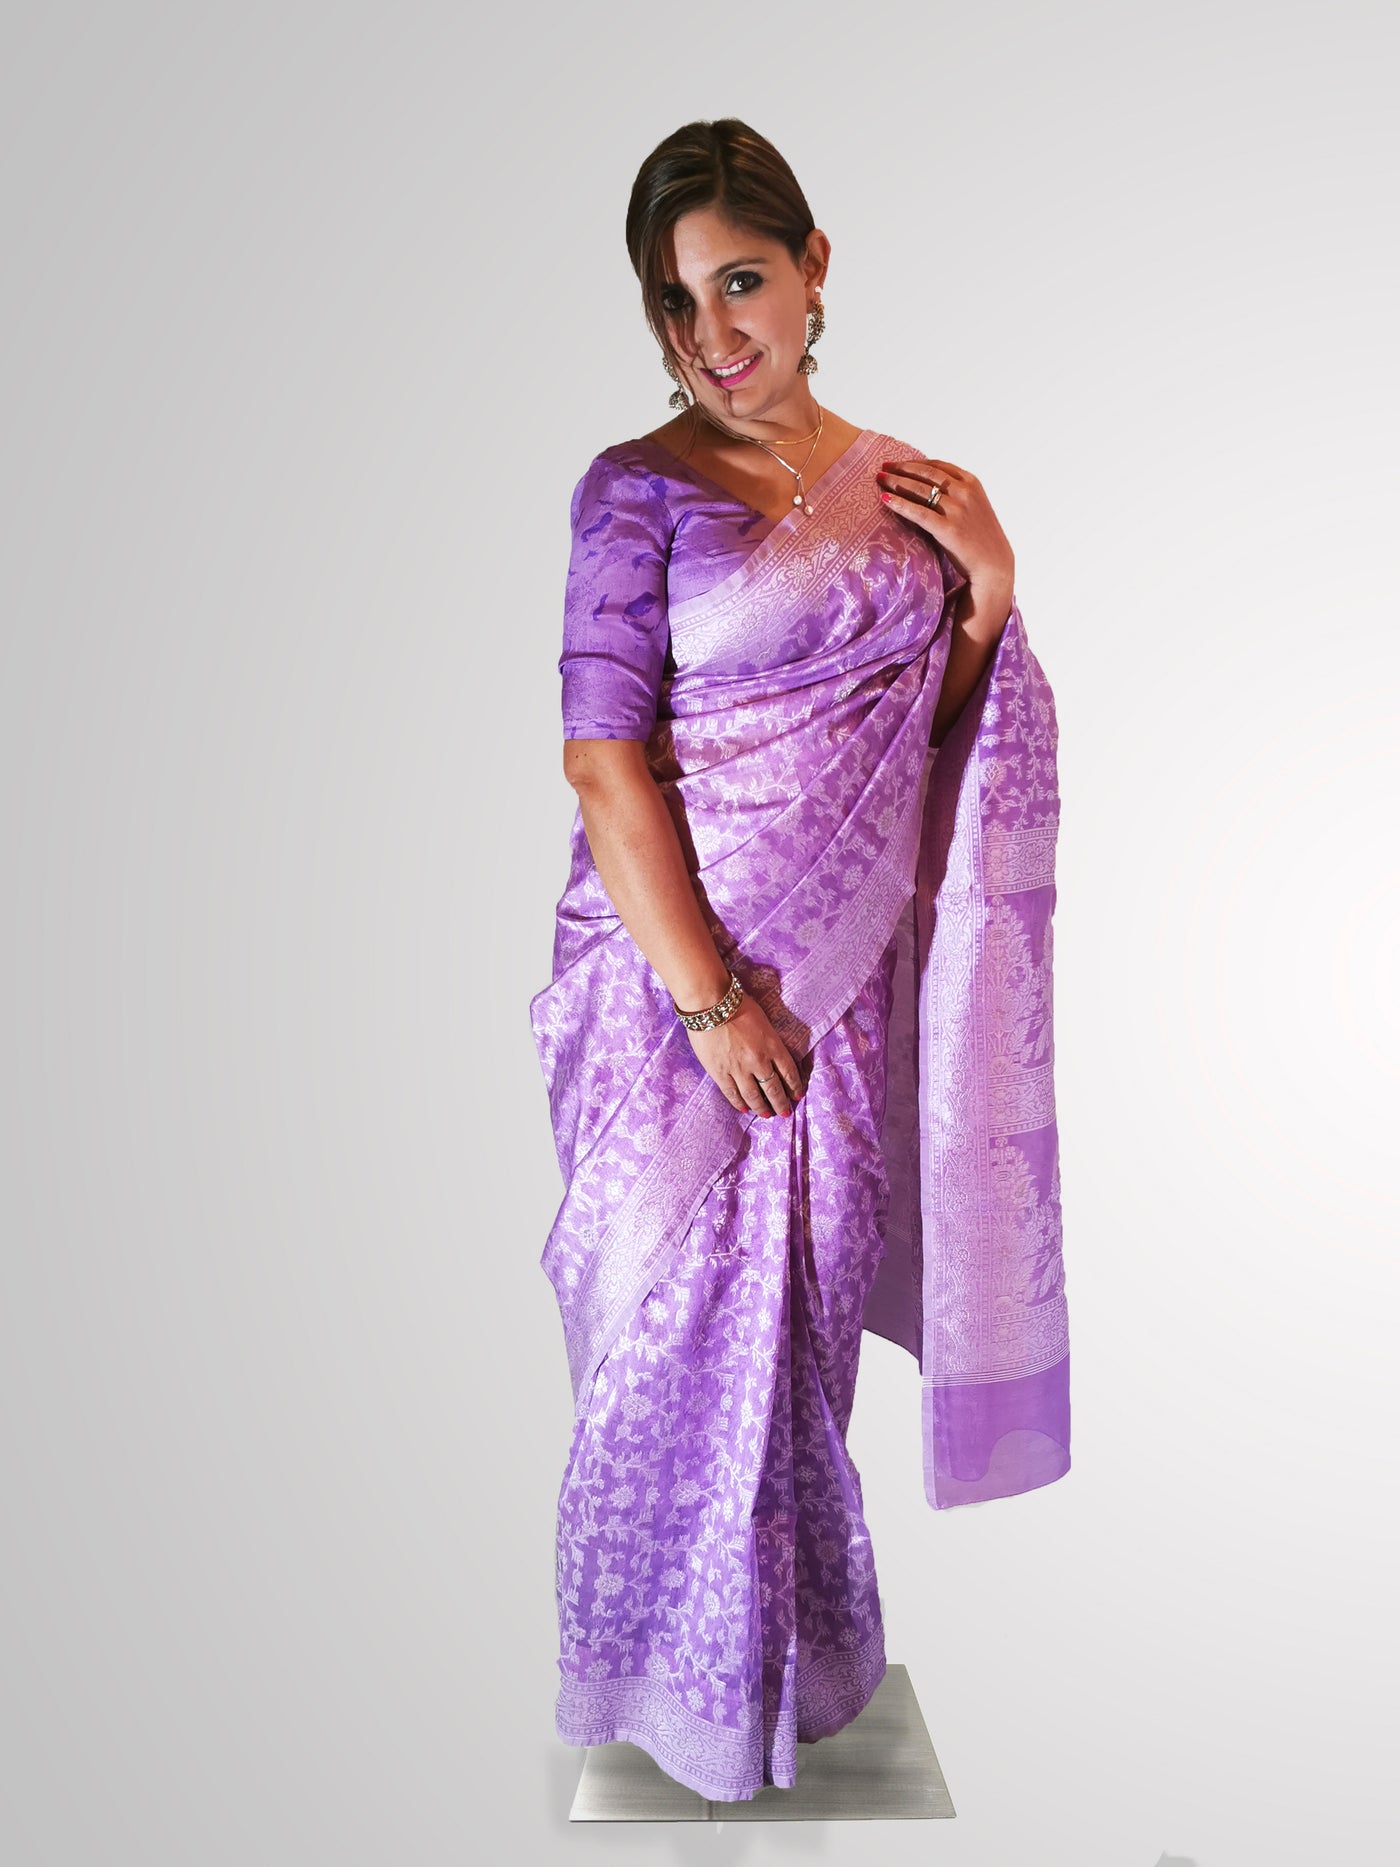 Purple Banarsi Saree - Indian Clothing in Denver, CO, Aurora, CO, Boulder, CO, Fort Collins, CO, Colorado Springs, CO, Parker, CO, Highlands Ranch, CO, Cherry Creek, CO, Centennial, CO, and Longmont, CO. Nationwide shipping USA - India Fashion X